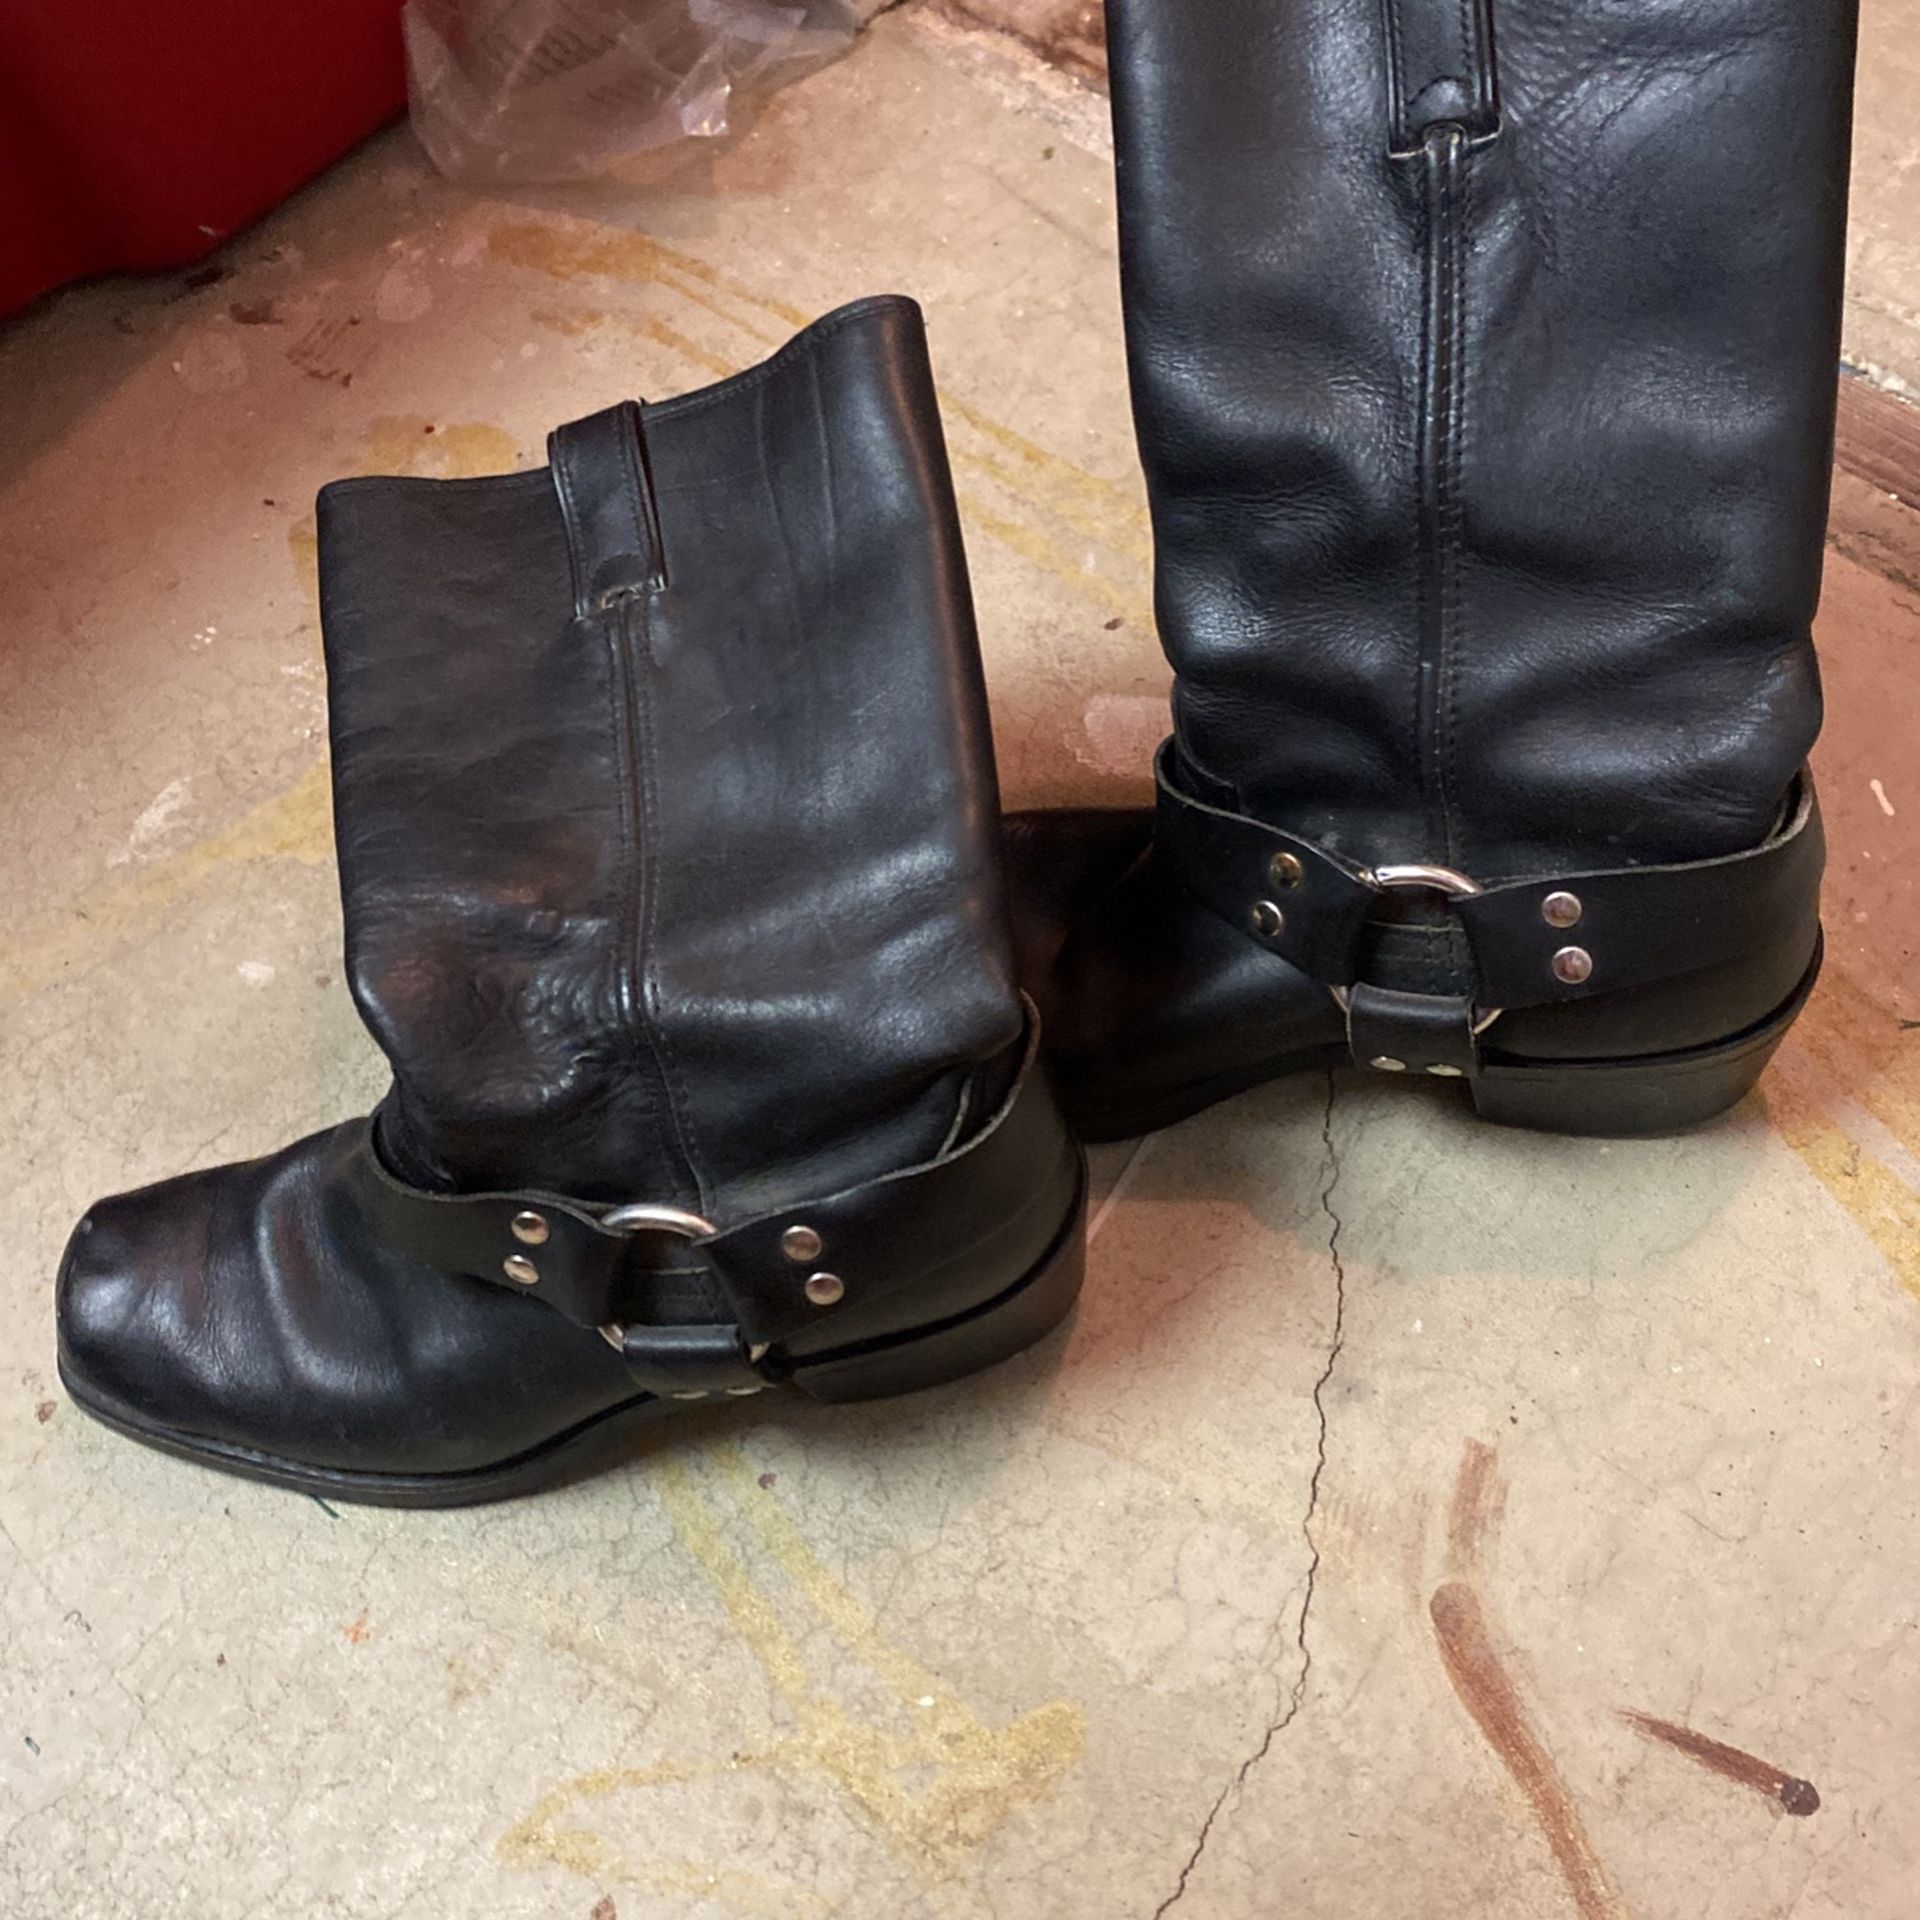 Cool West Oil Proof Size 9 Medium Boot